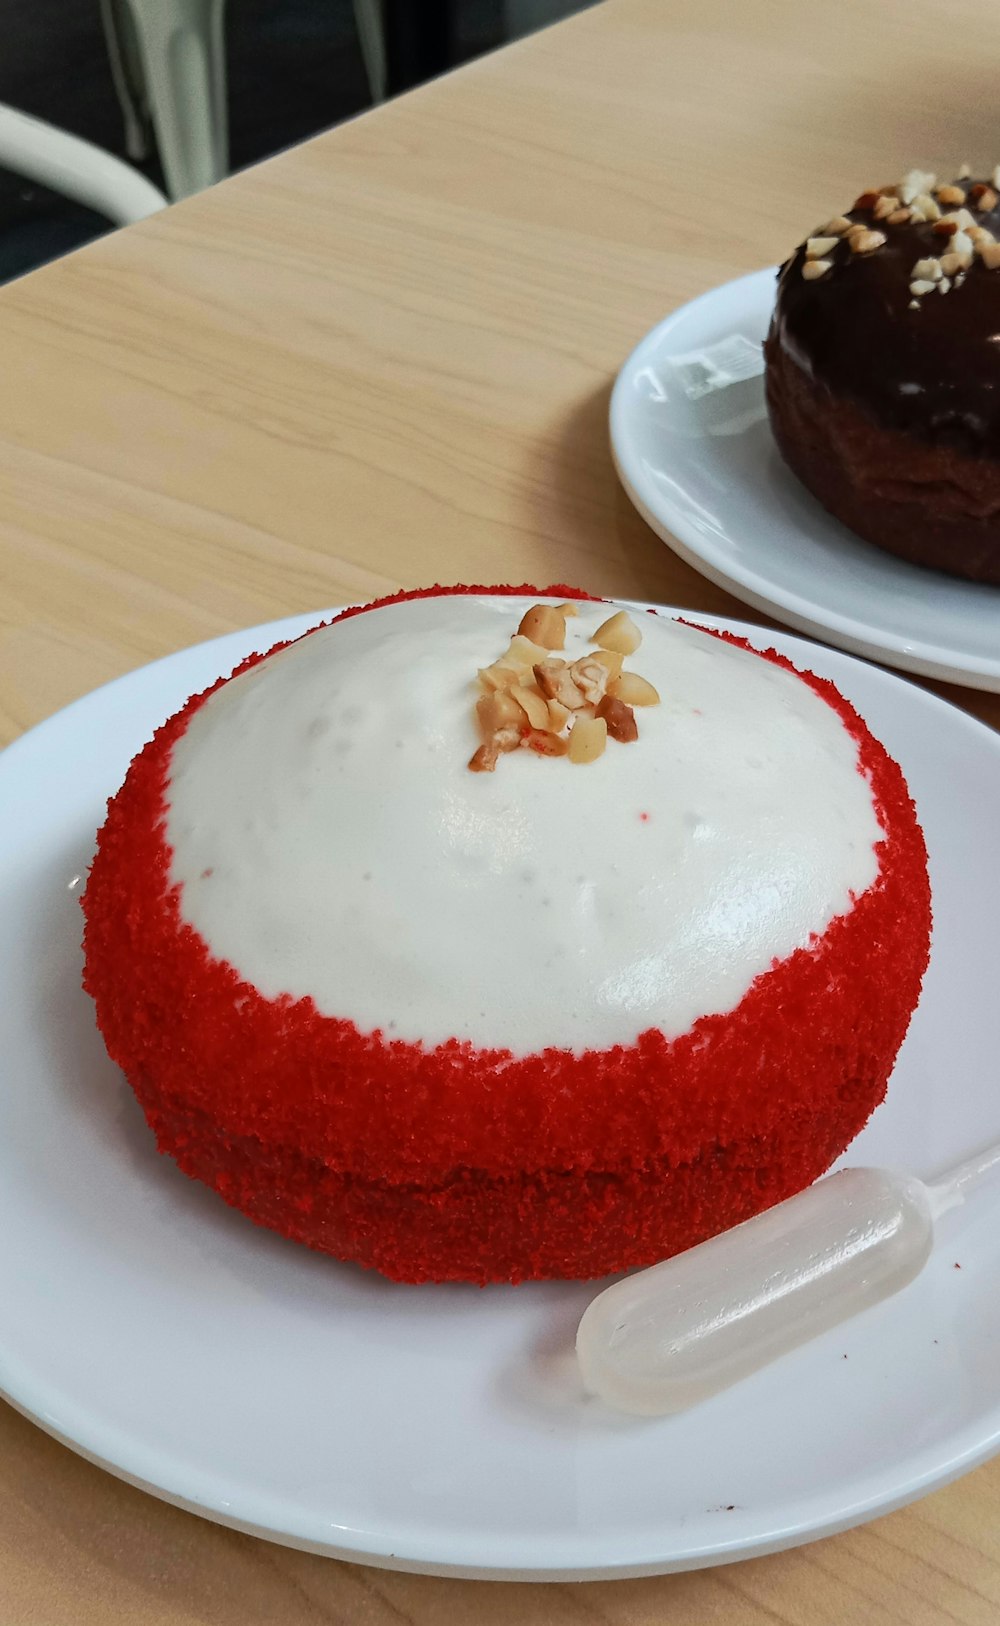 a red velvet cake with white frosting and nuts on top